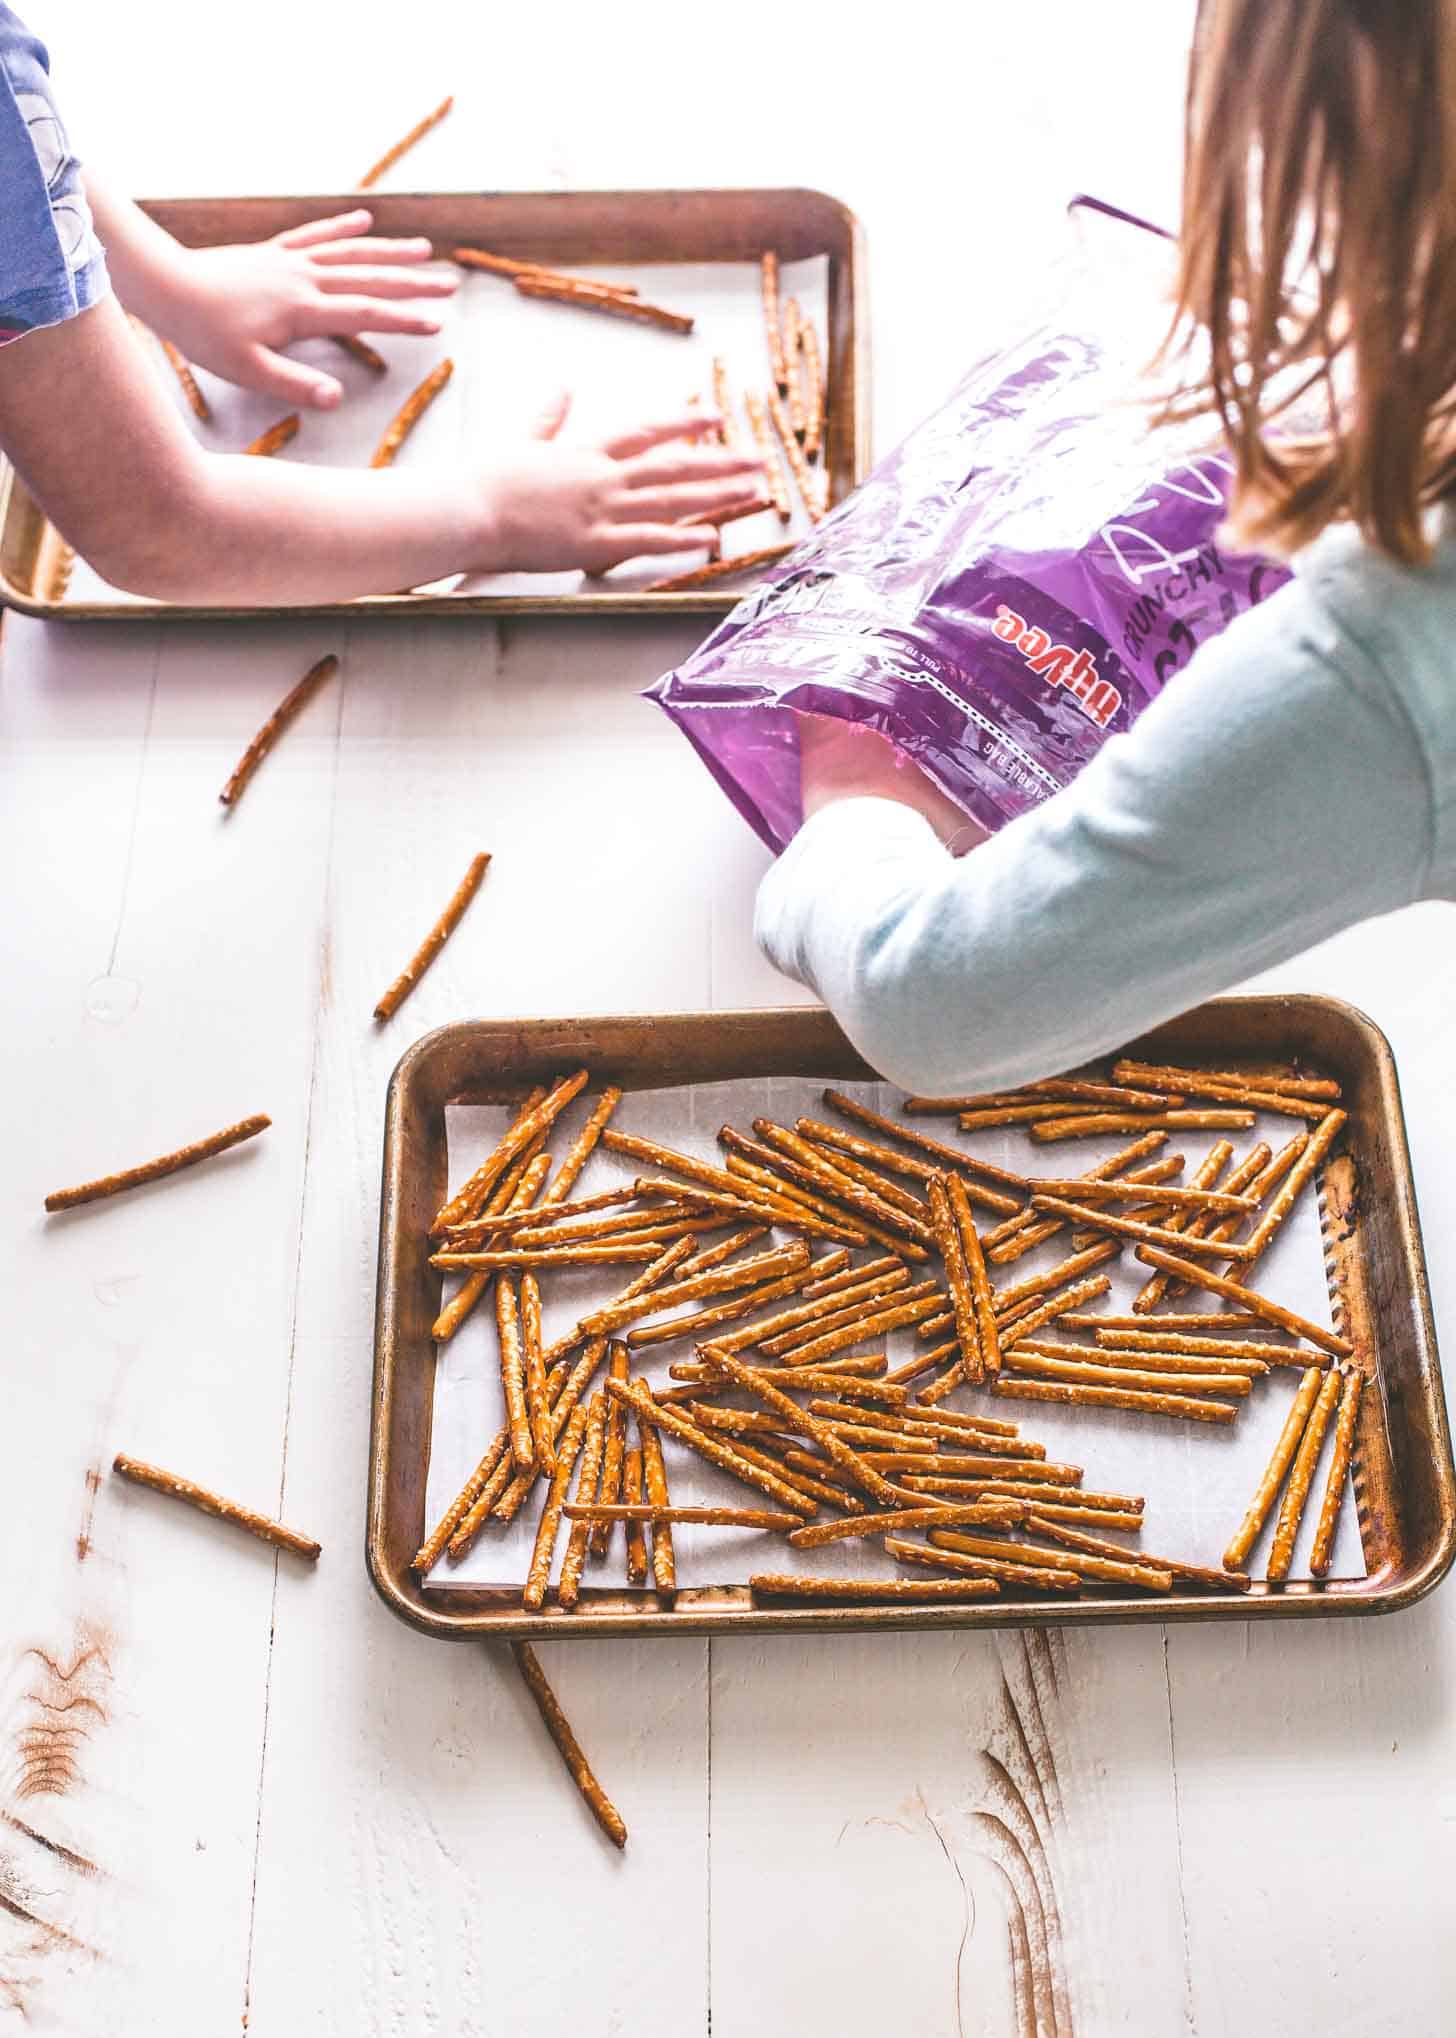 2 young girls spread Pretzels onto parchment lined sheet pans